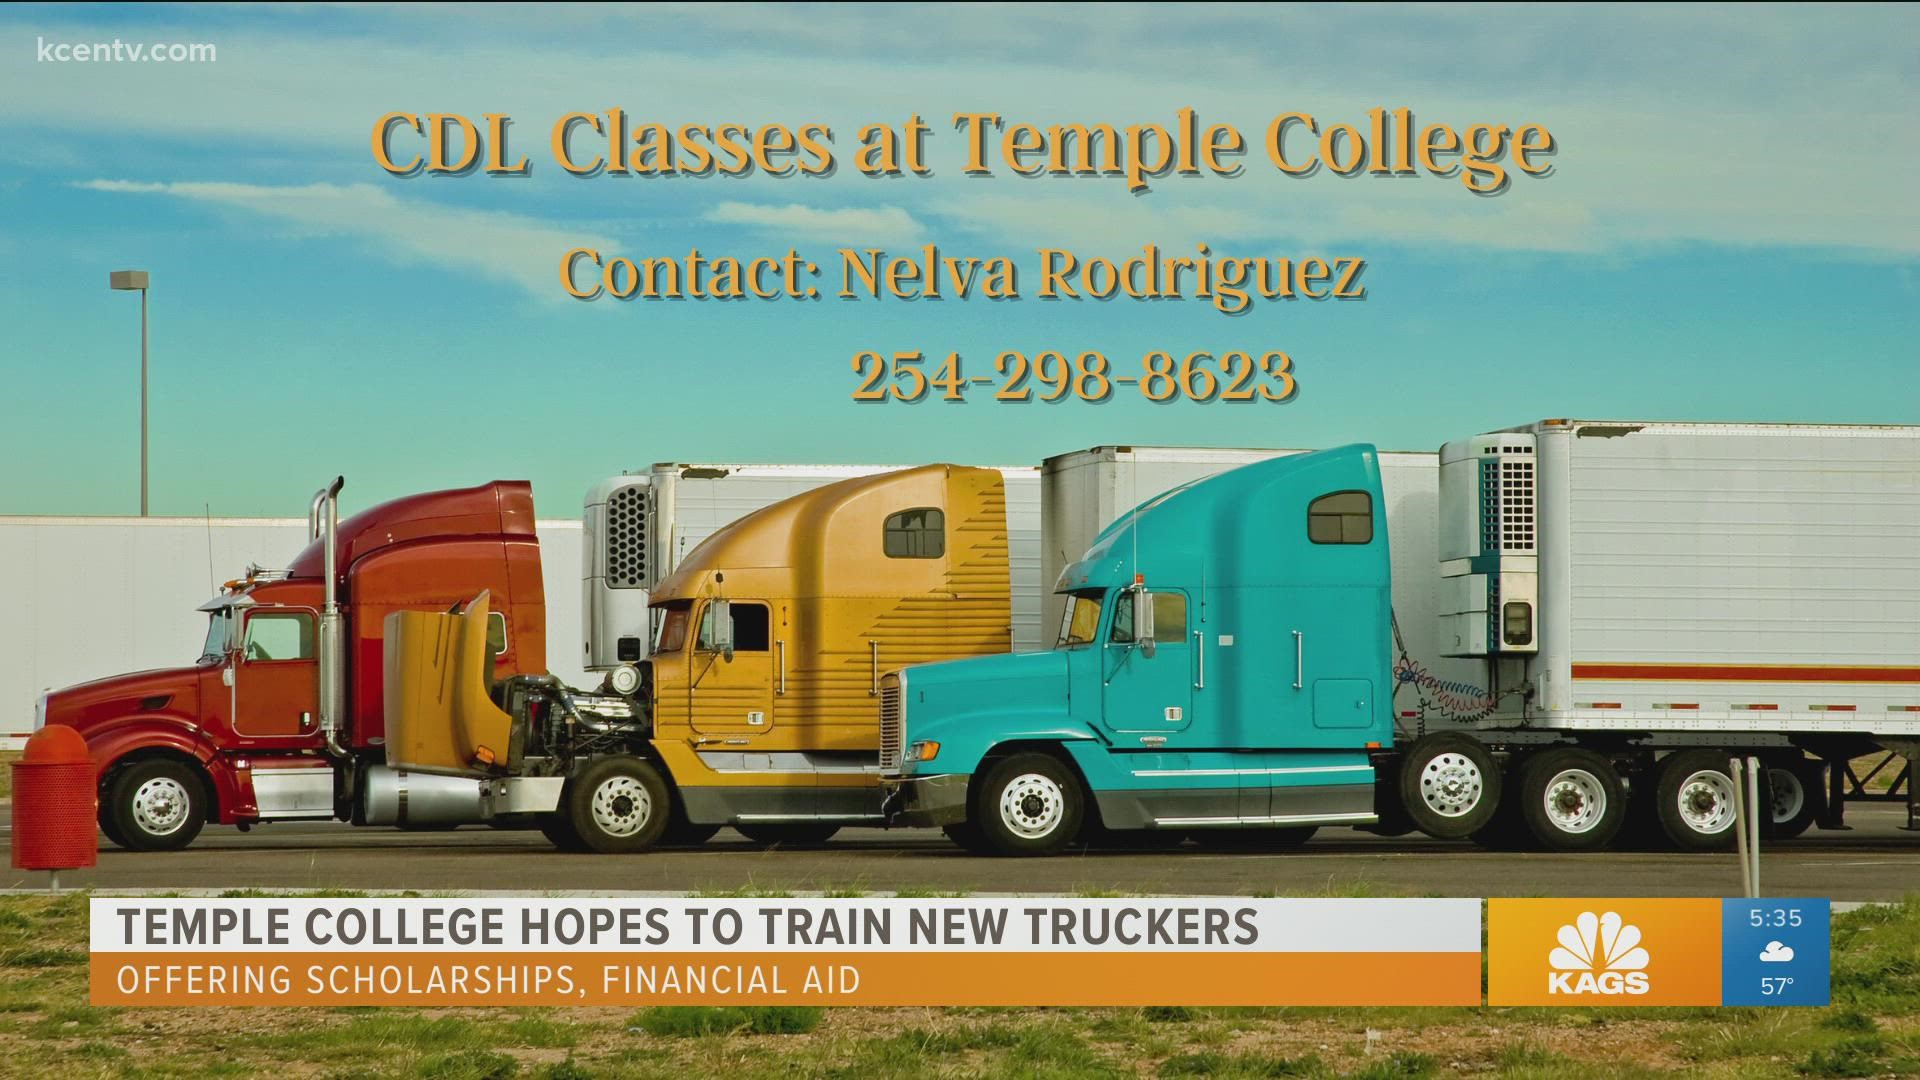 Truckers are the heartbeat of America and the shortage of drivers is concerning to the local college